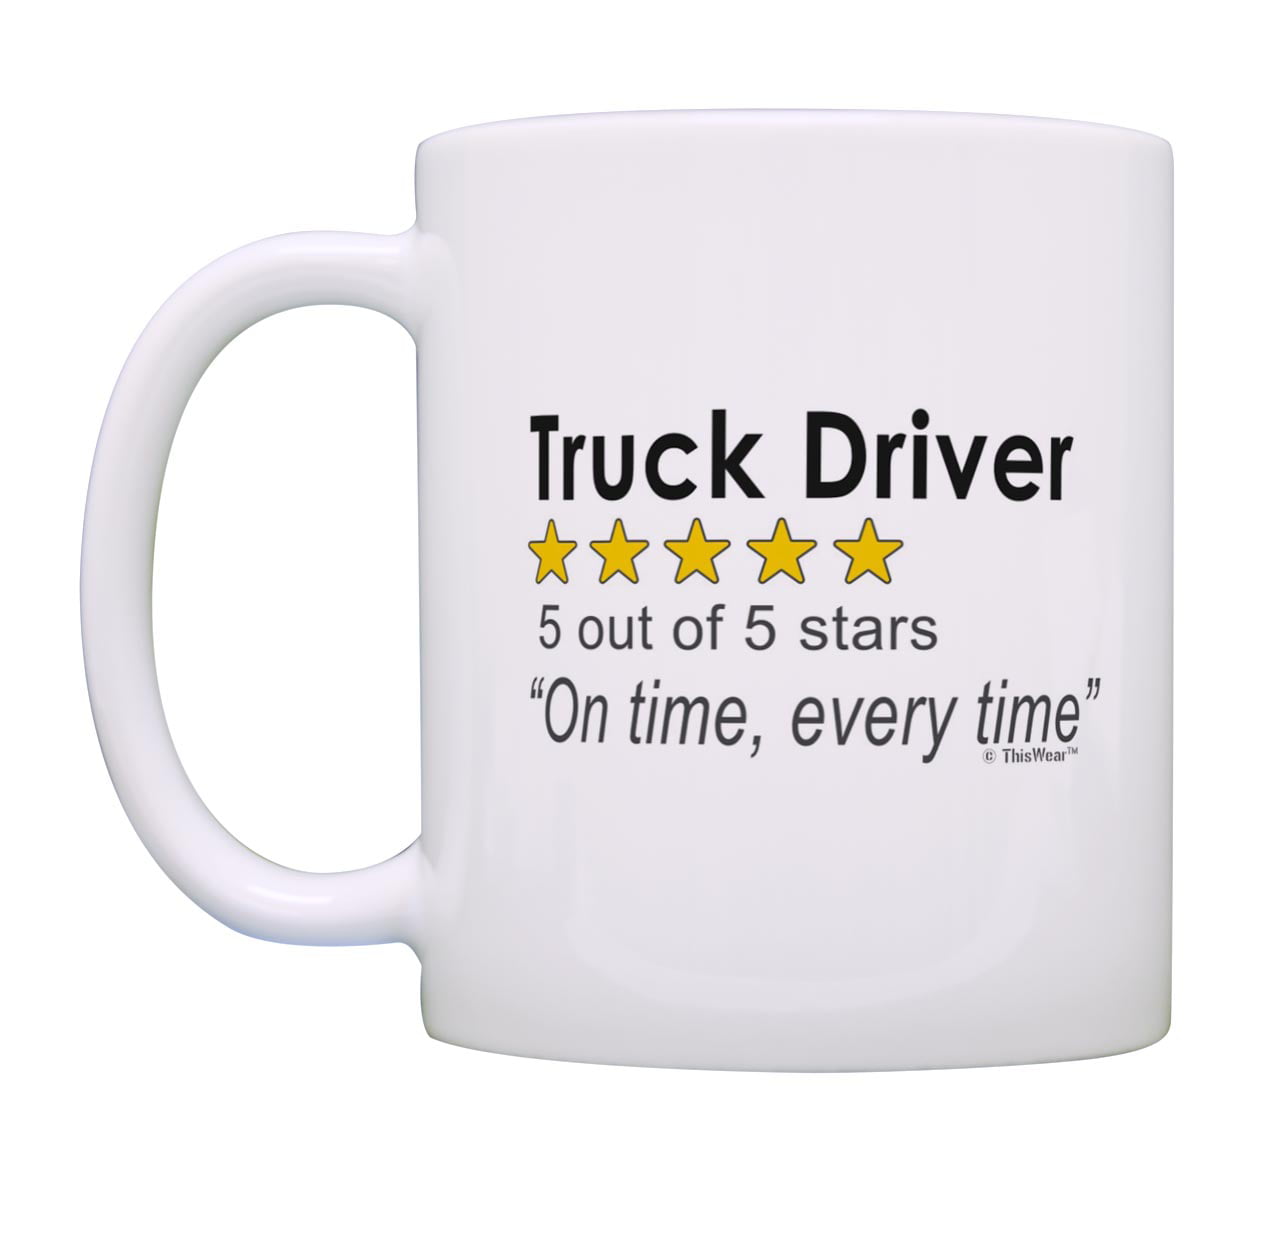 Truck Driver Gift, Trucker Mugs, Truck Driver Coffee Mugs, on the Road  Again, Truck Gift, Gifts for Him, Christmas Gifts, Gift for Trucker 